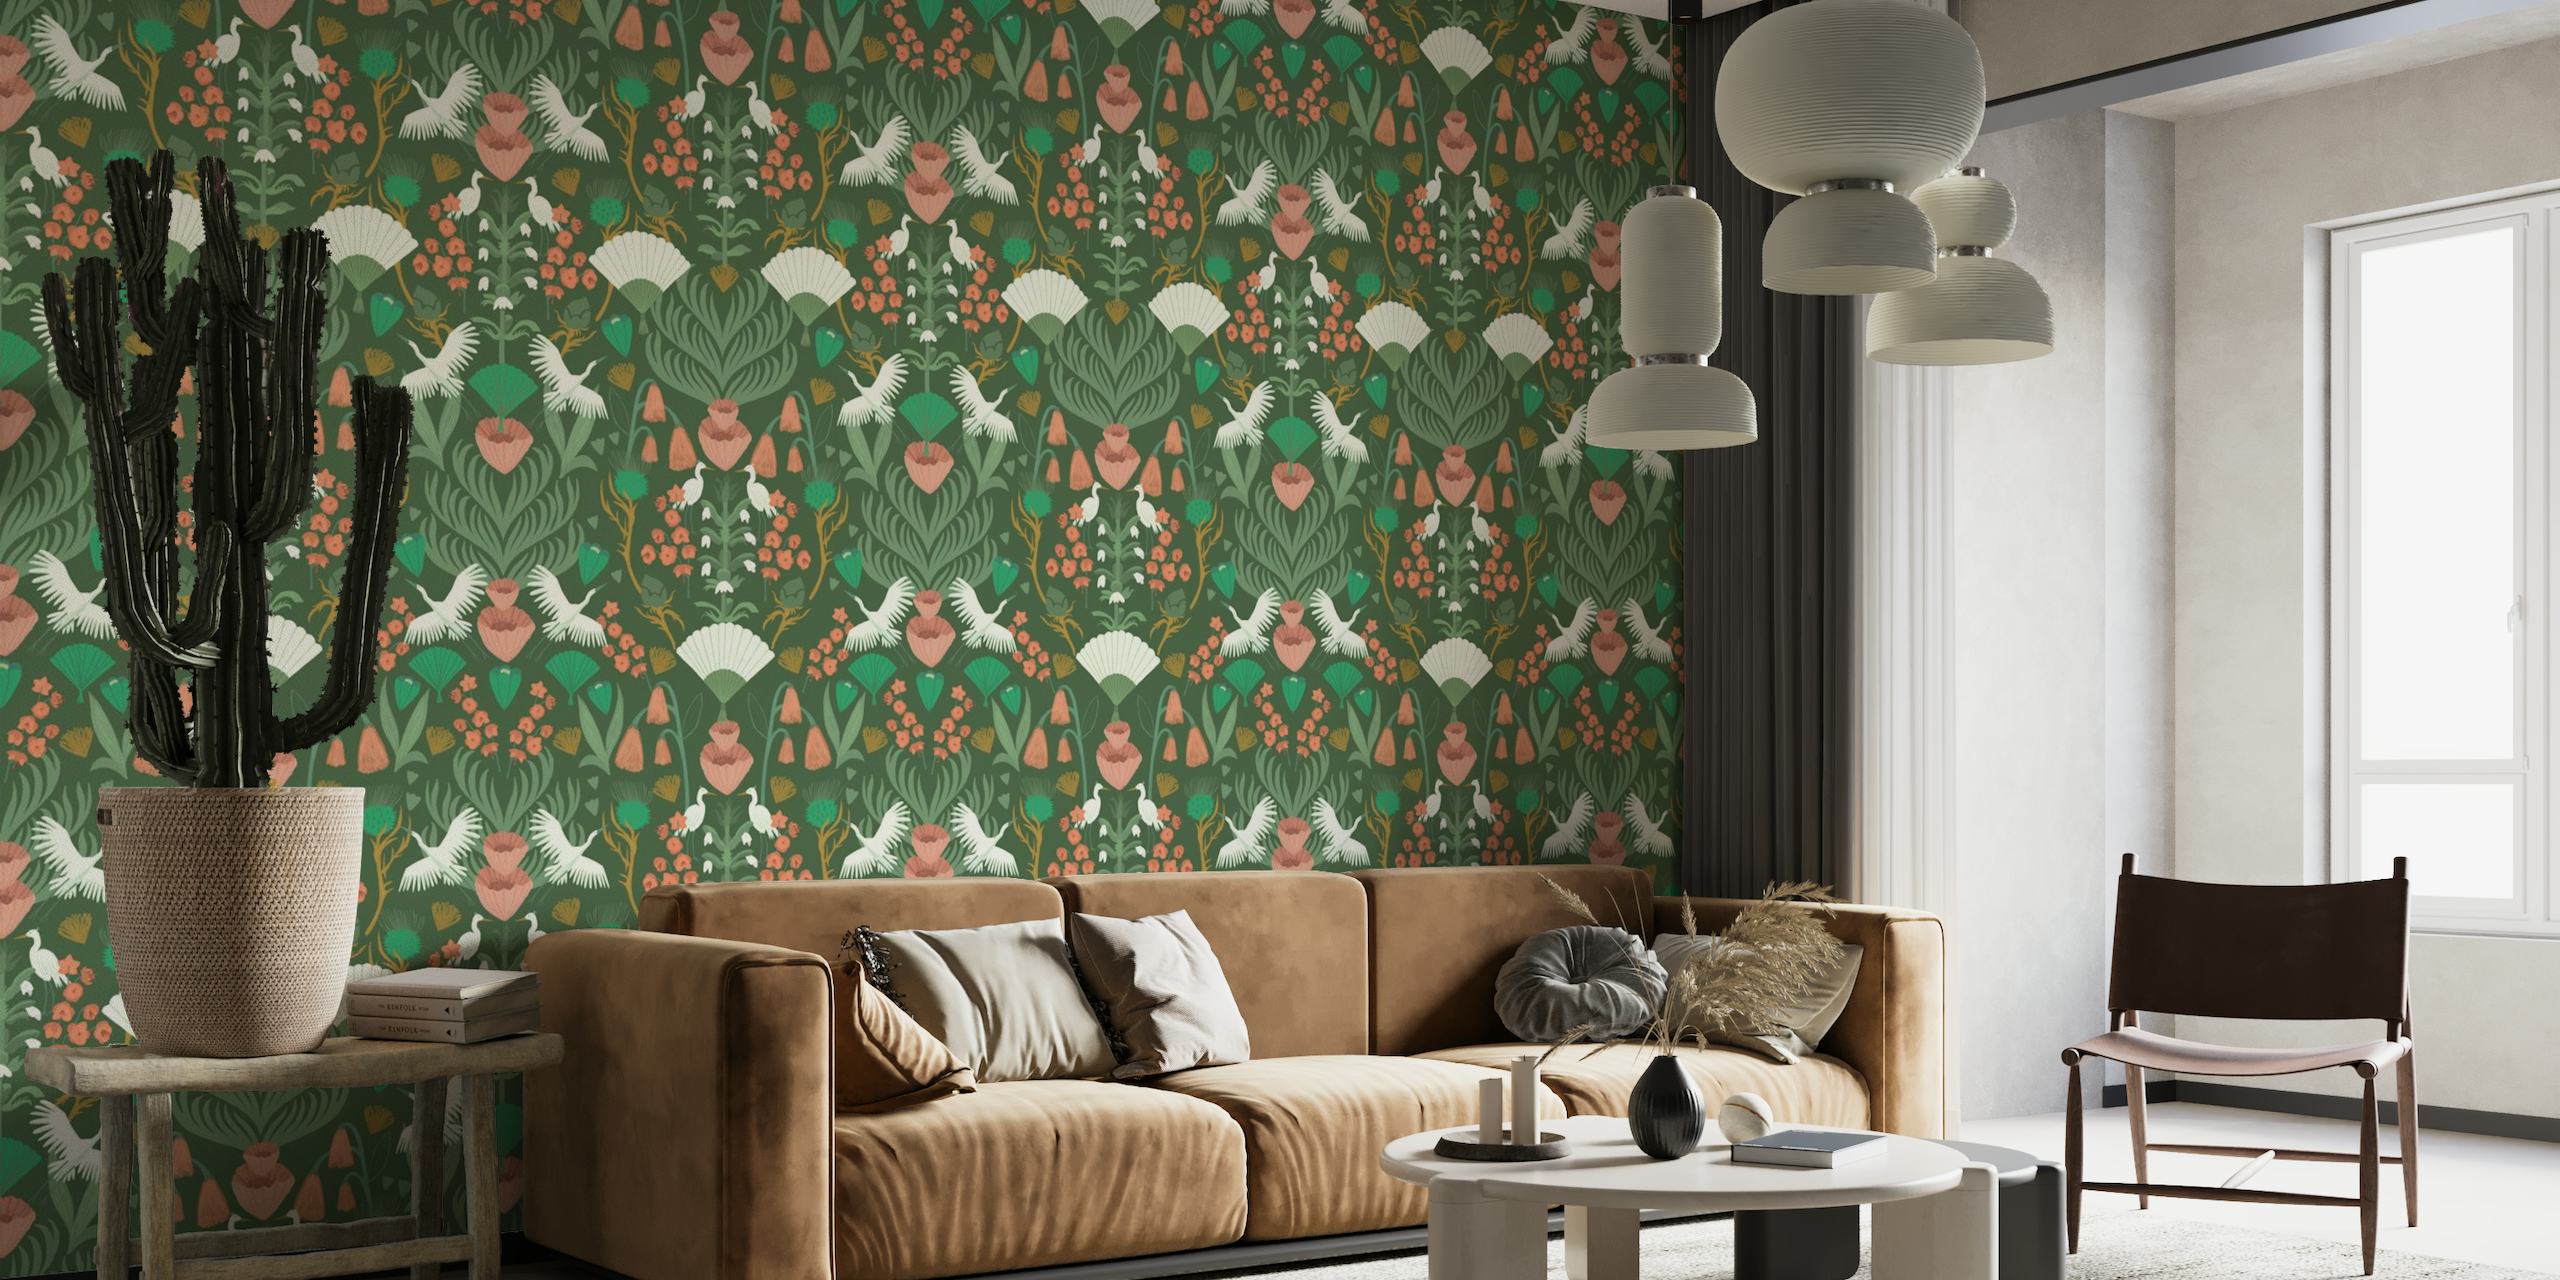 botanical-inspired wall mural with birds and flowers on a dark green background